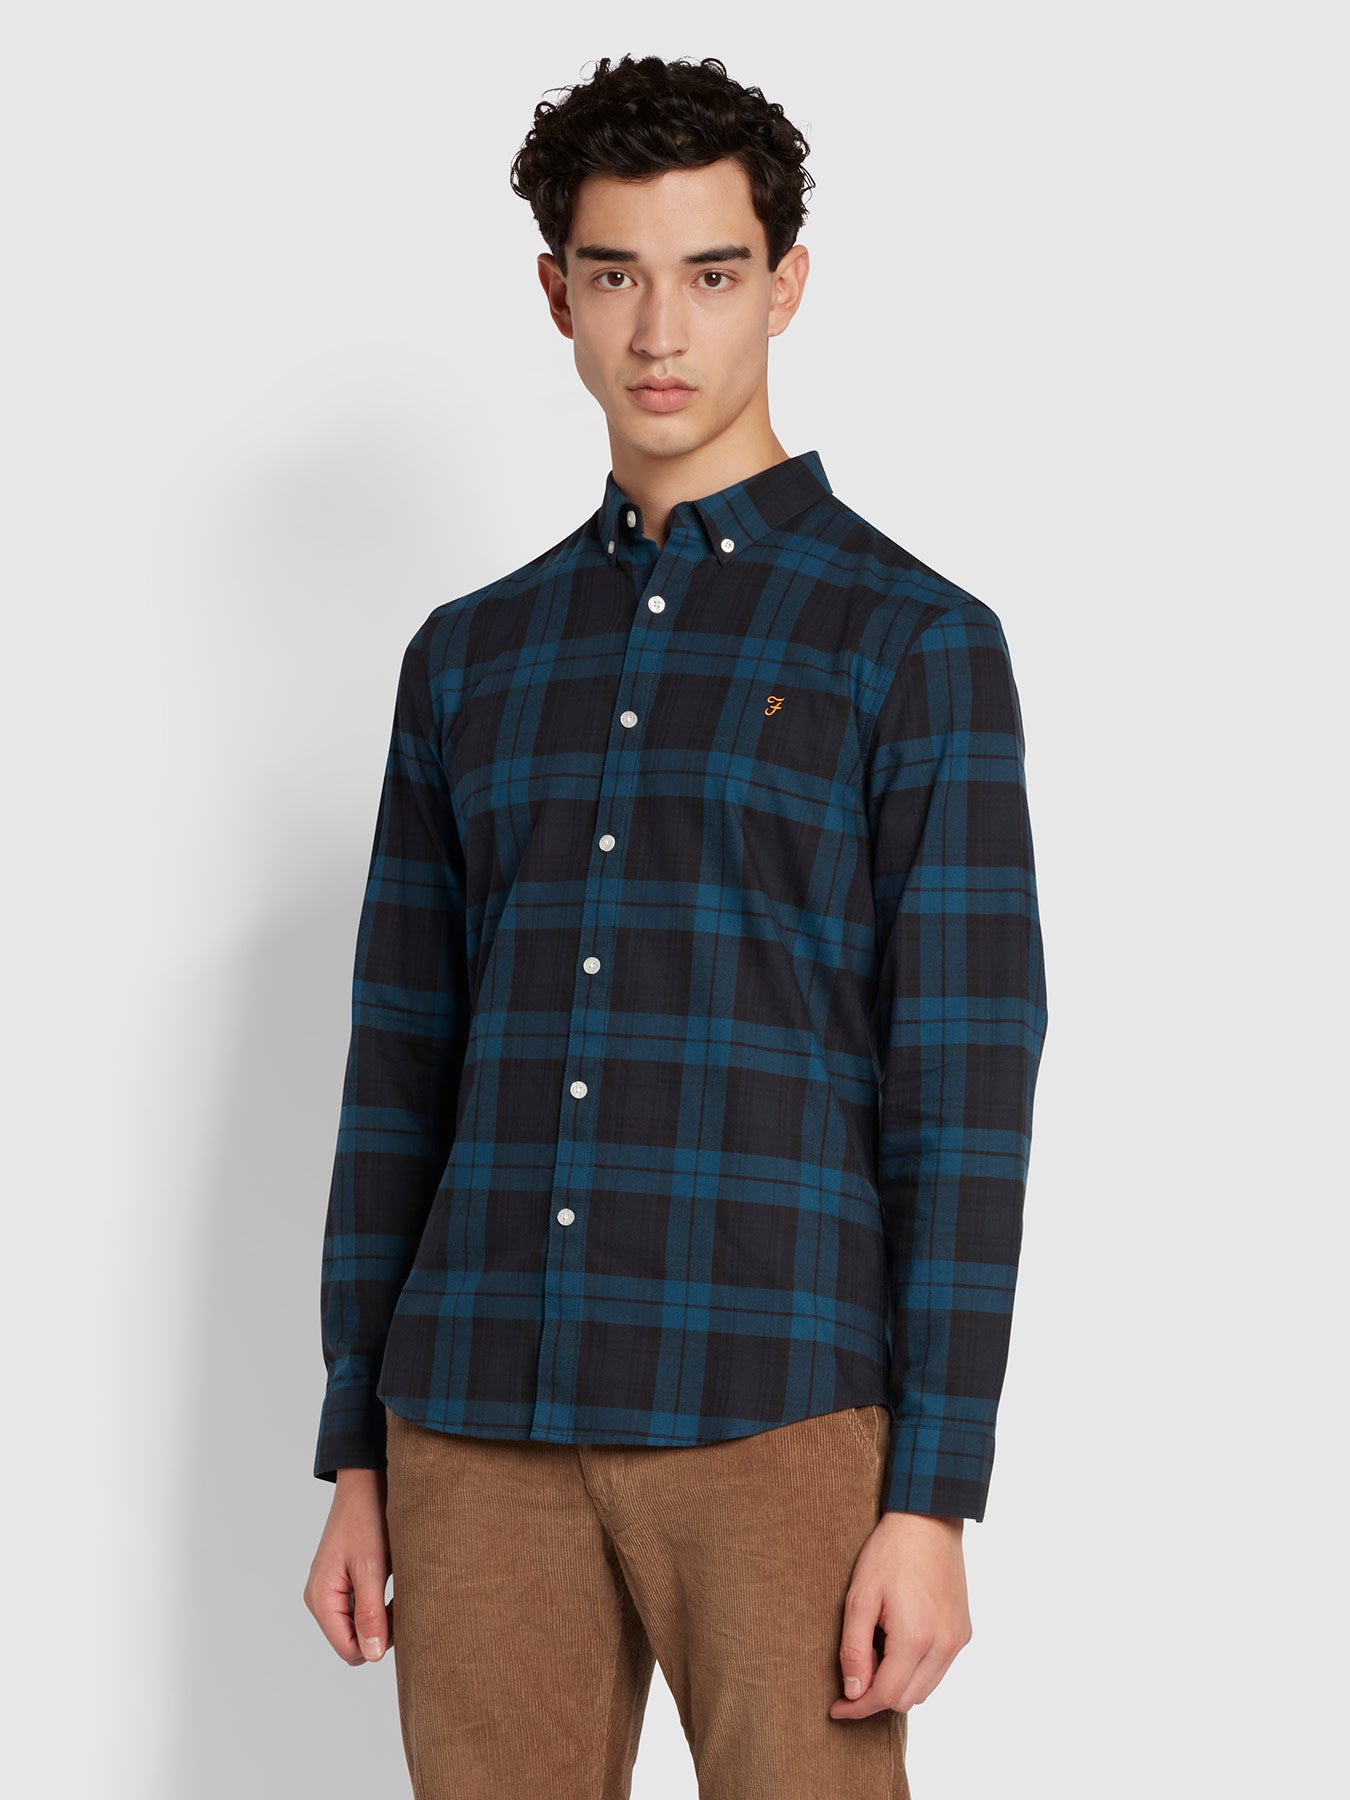 View Brewer Slim Fit Organic Cotton Long Sleeve Check Shirt In True Navy information